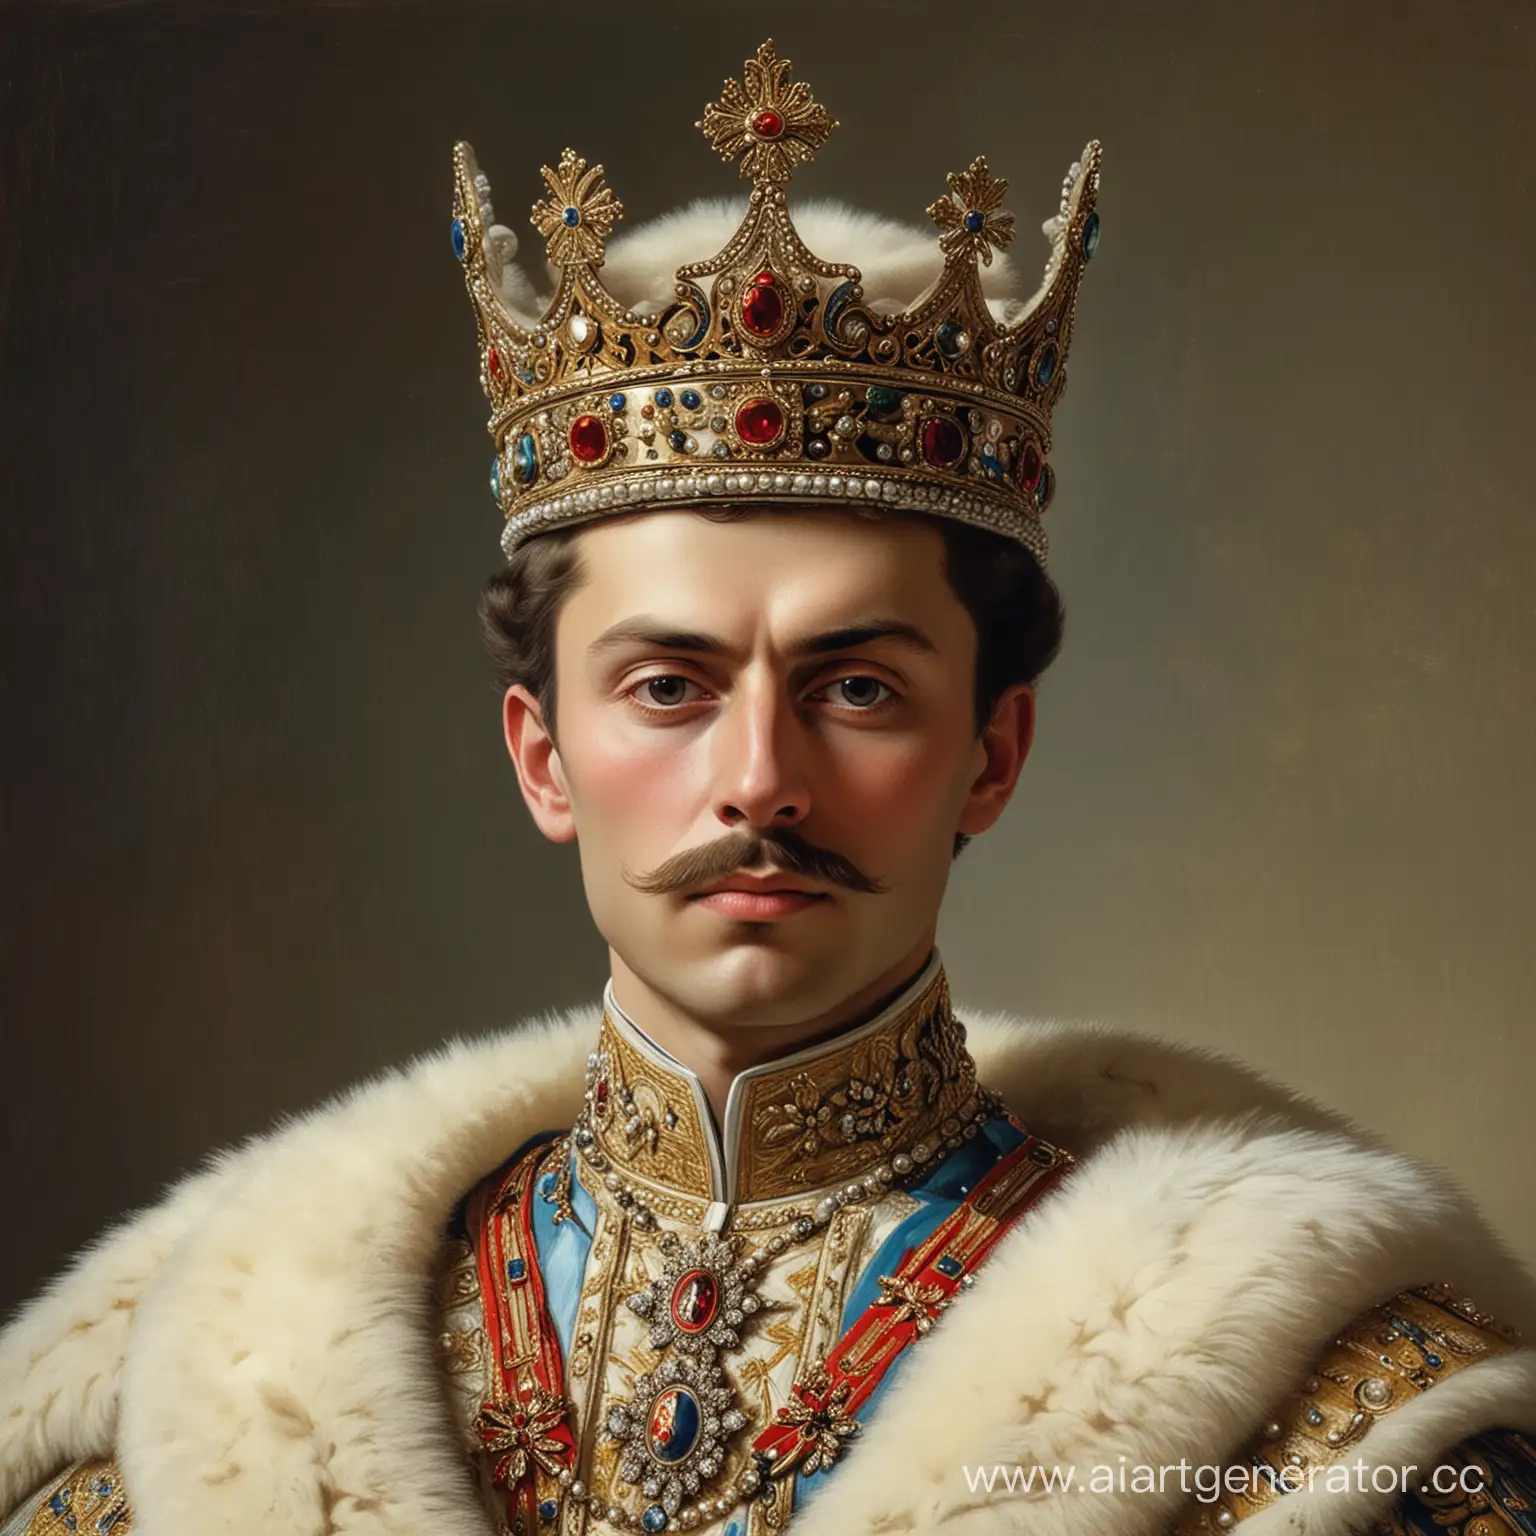 Young-Tsar-with-Crown-Majestic-Portrait-of-a-Youthful-Monarch